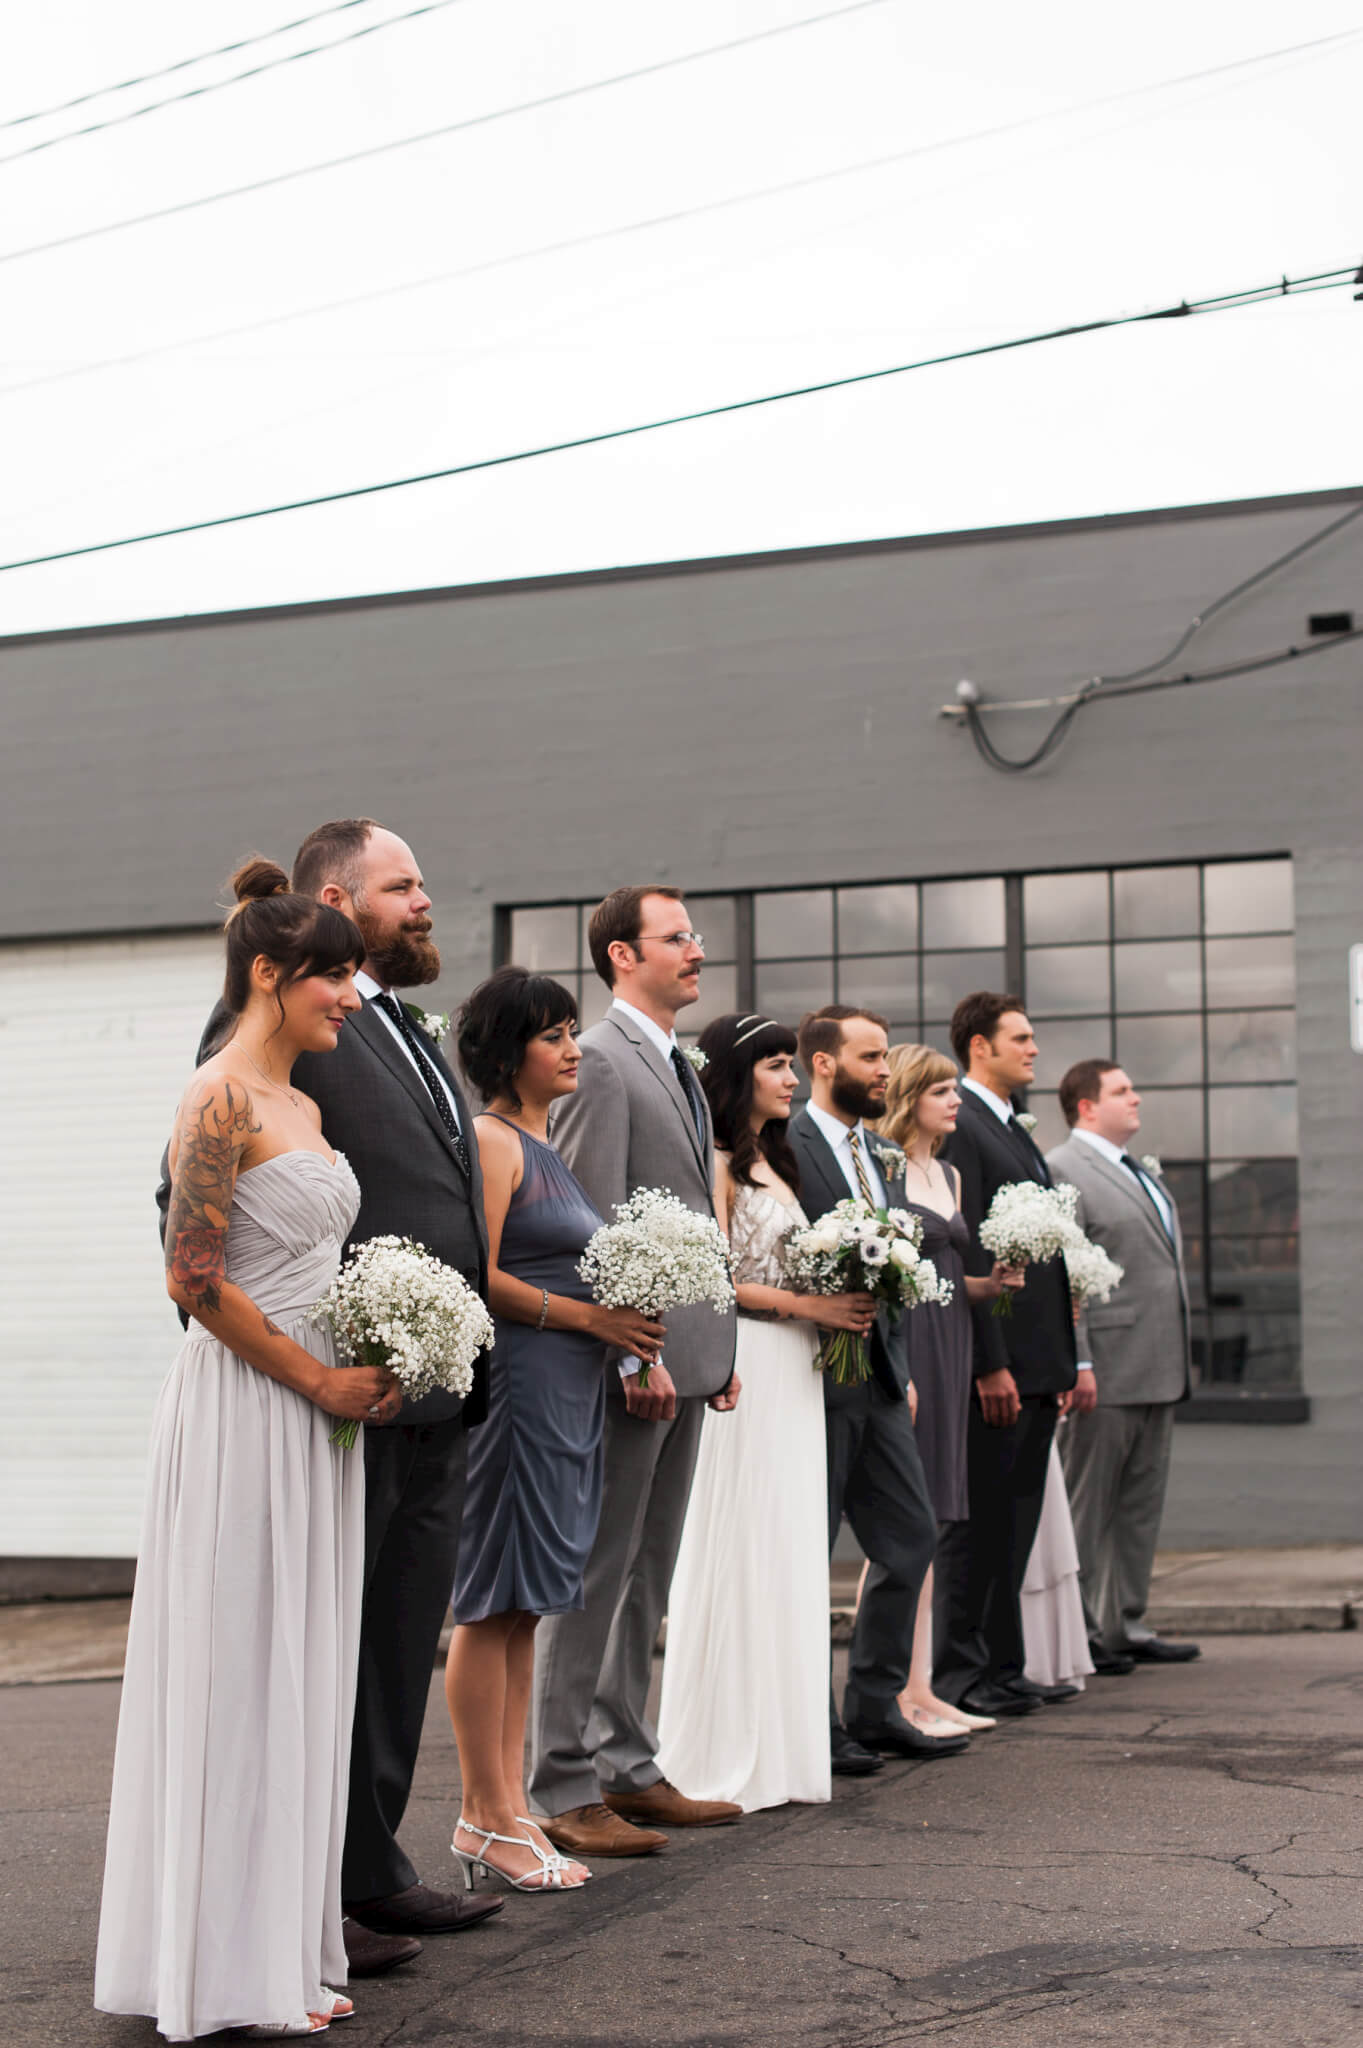 A beautiful wedding party poses on a street in industrial Portland, Oregon. 